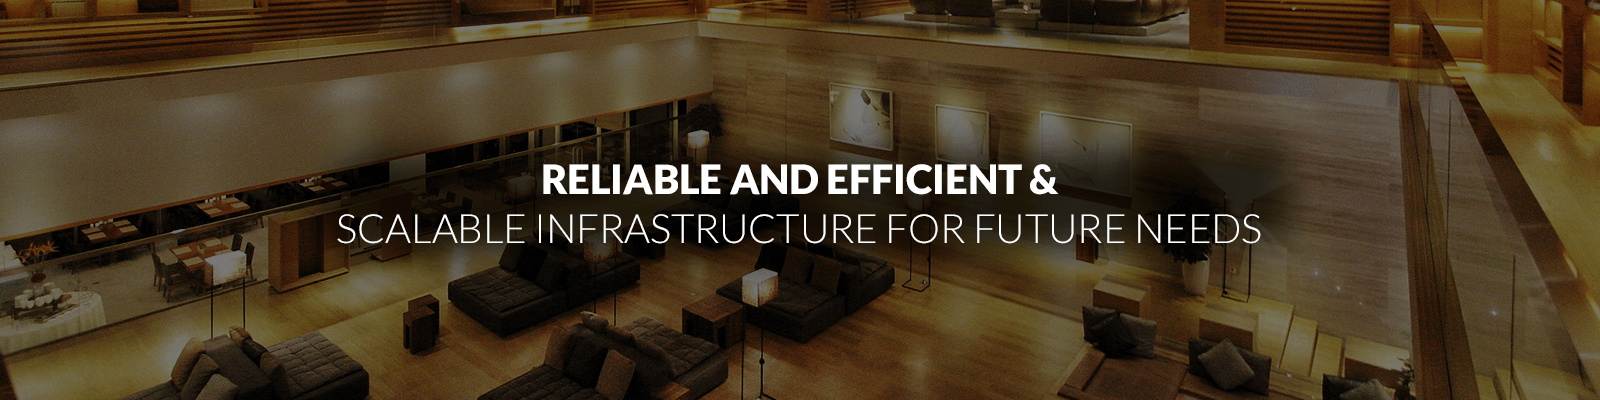 Hotel Infrastructure solutions